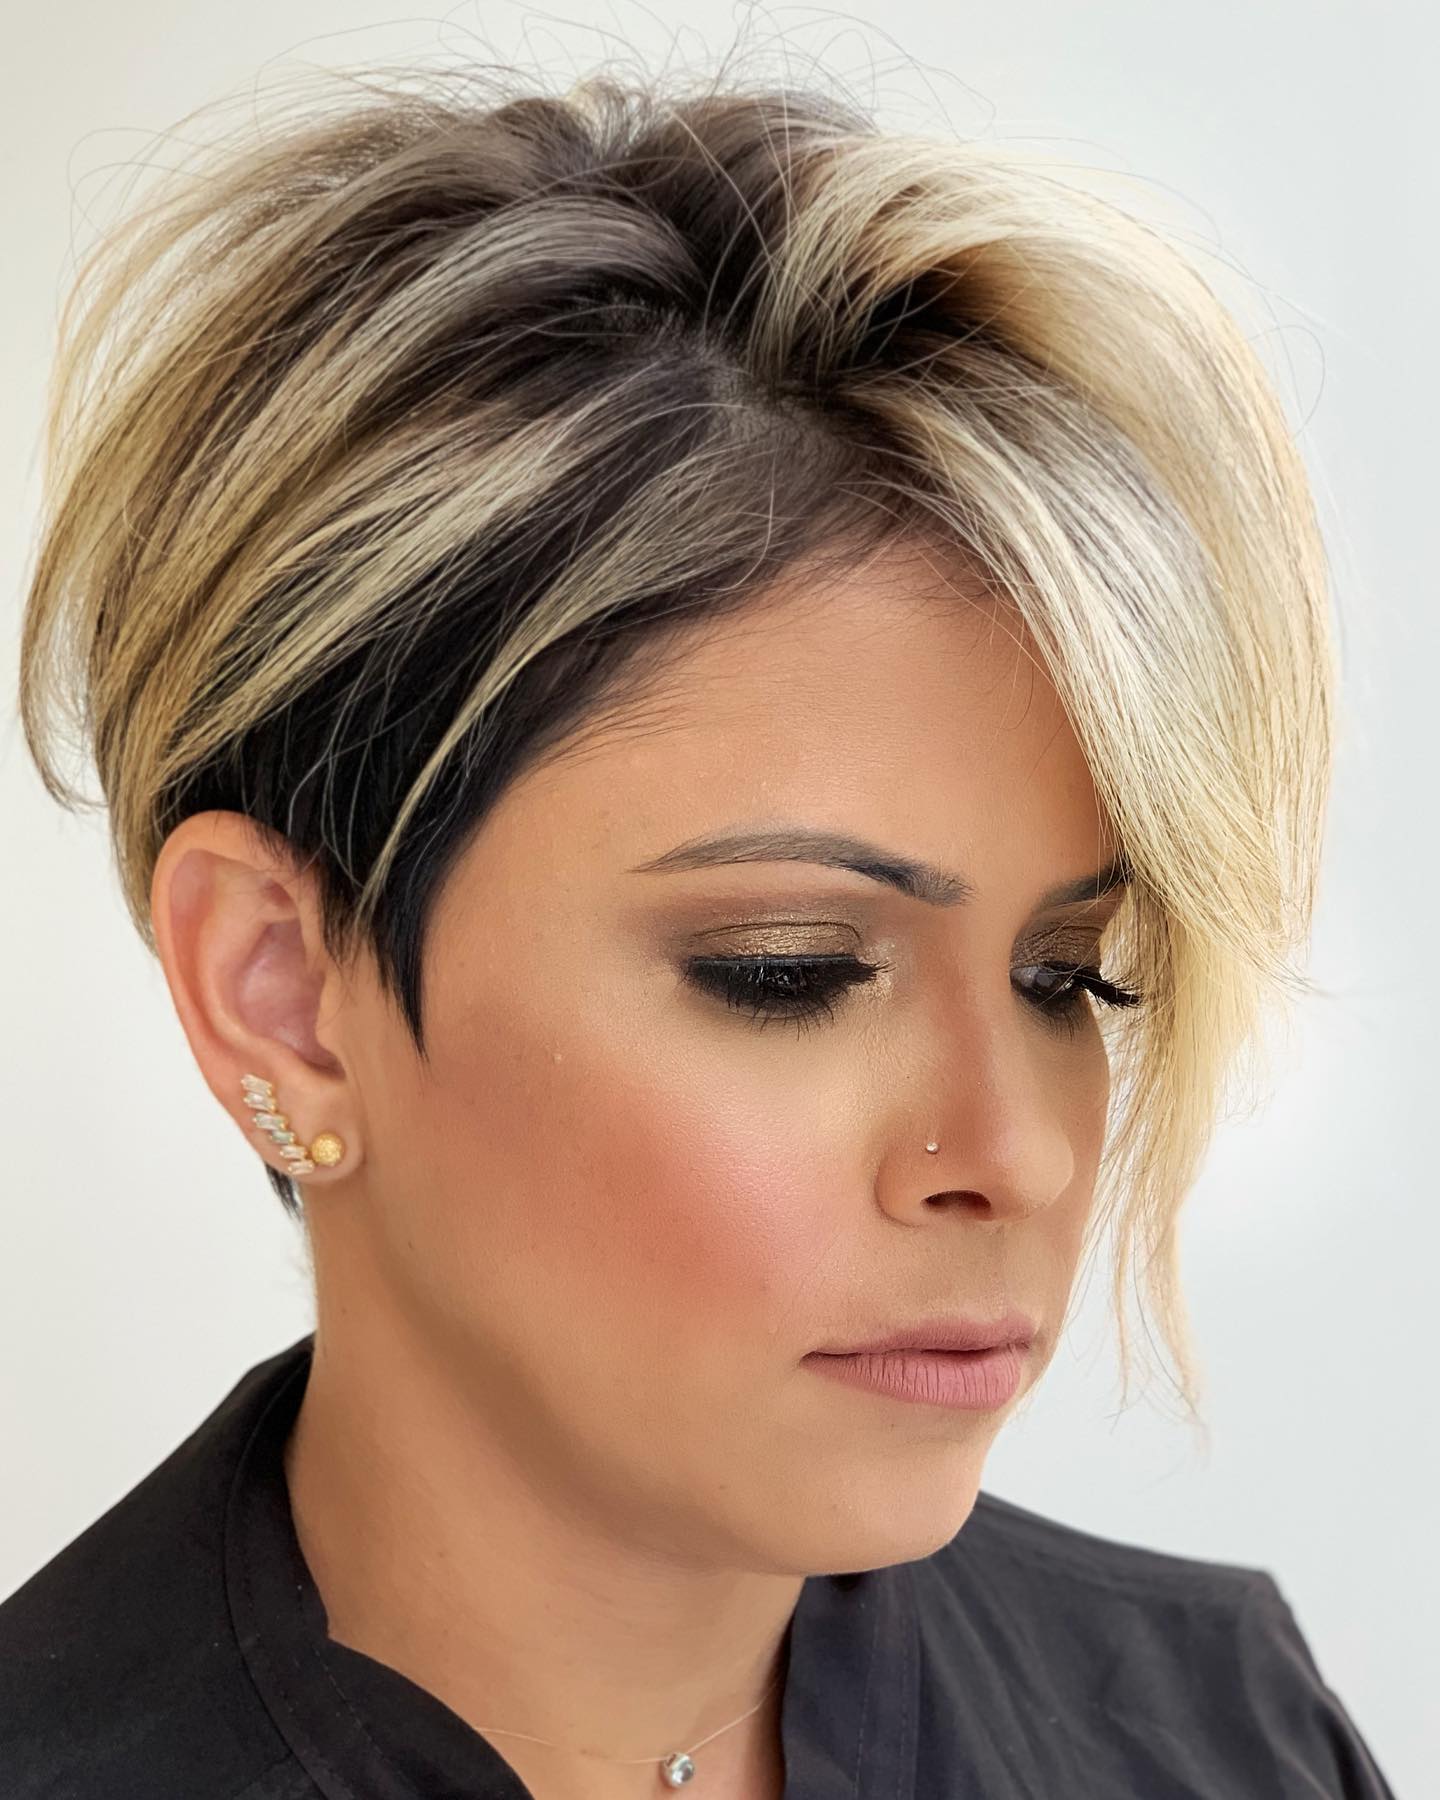 Dirty Blonde Color on Short Cut with Long Fringe